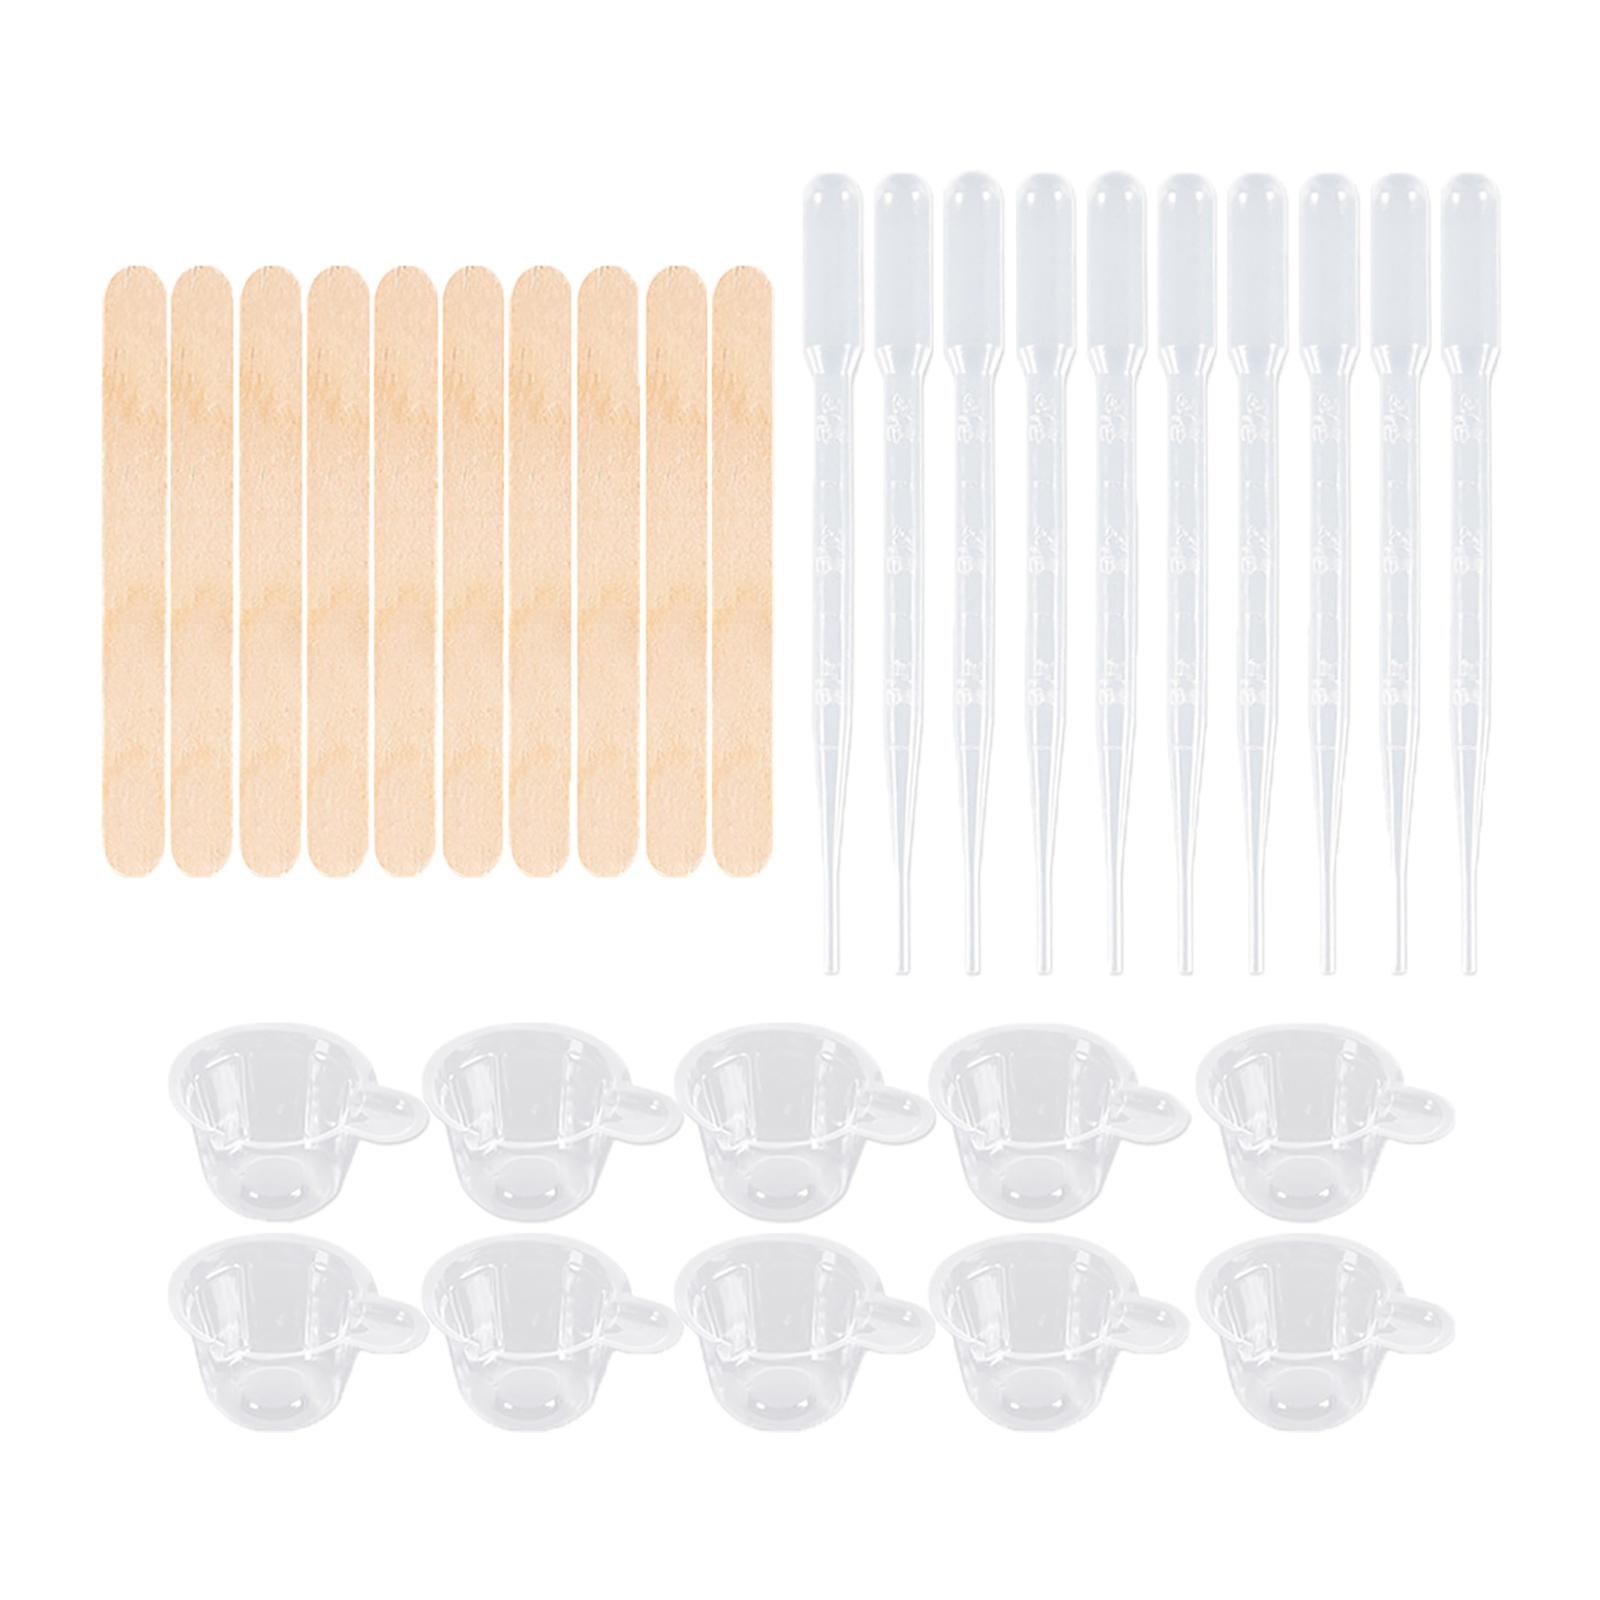 Reusable Resin Tools Supplies with ,Mixing Cup , ,Silicone Set Epoxy Resin  Tool Starter resin material s , 30Pcs